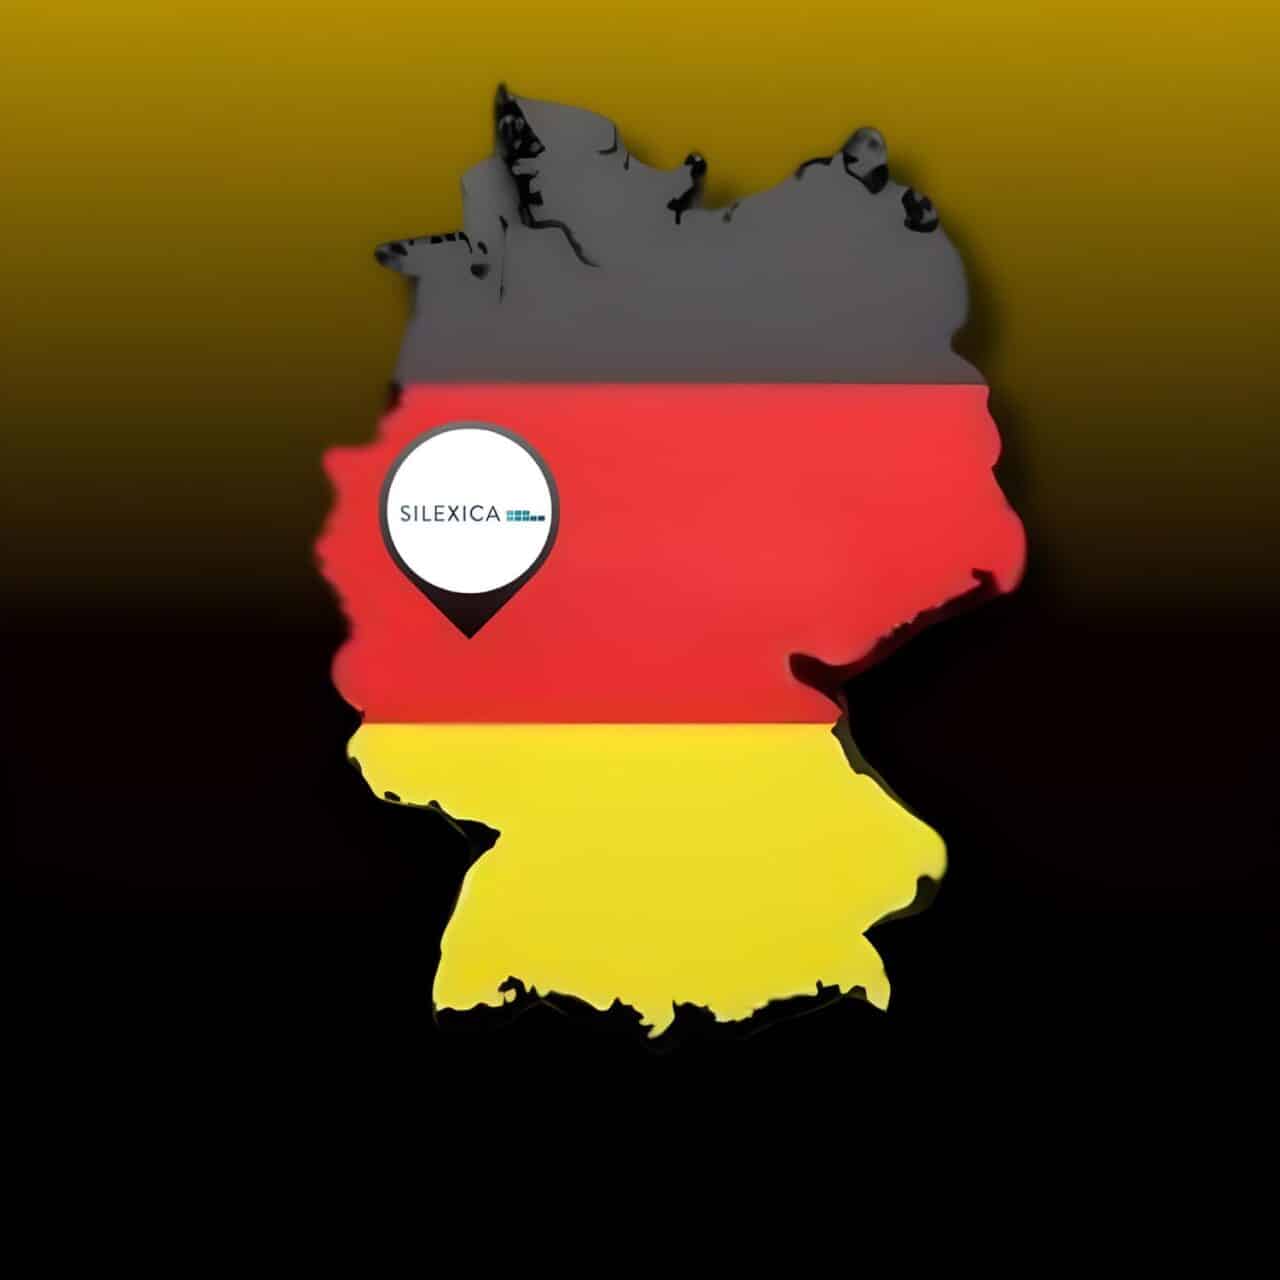 a map of Germany on a yellow & black background with a Silexica logo presenting company's geo location